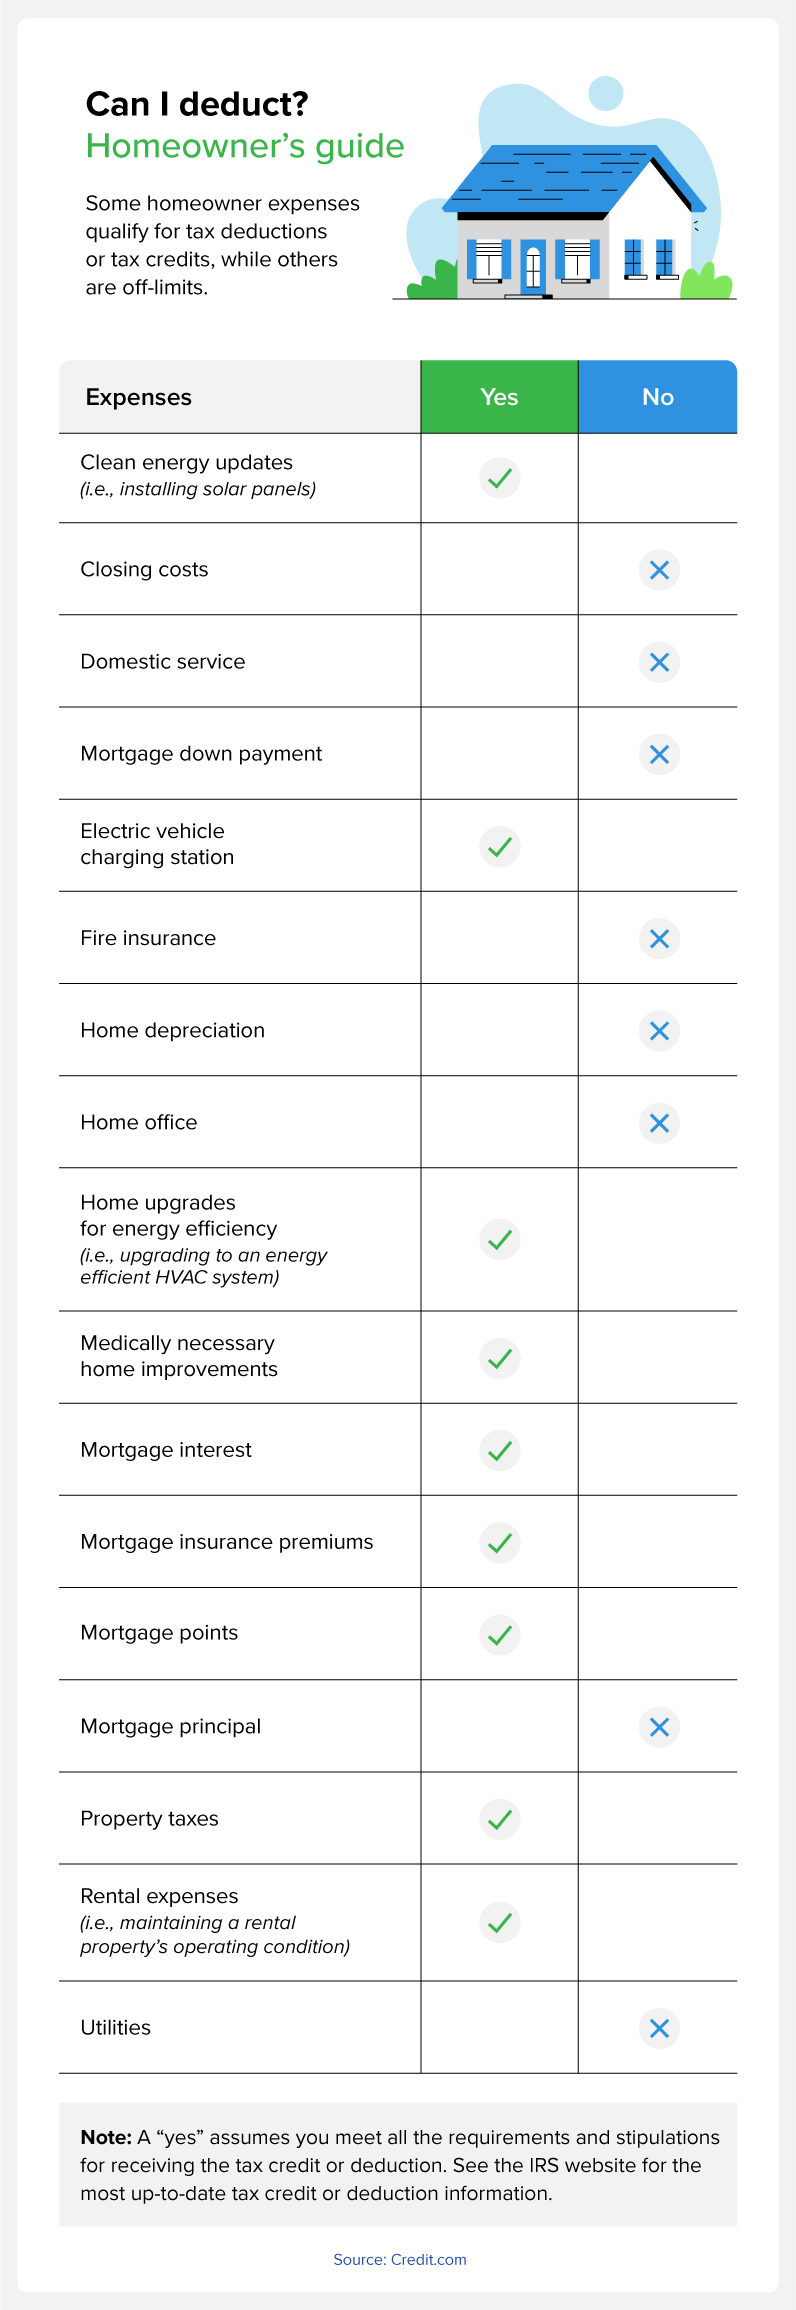 Summary of common homeowner expenses and whether they are eligible for homeownership tax credits or deductions.